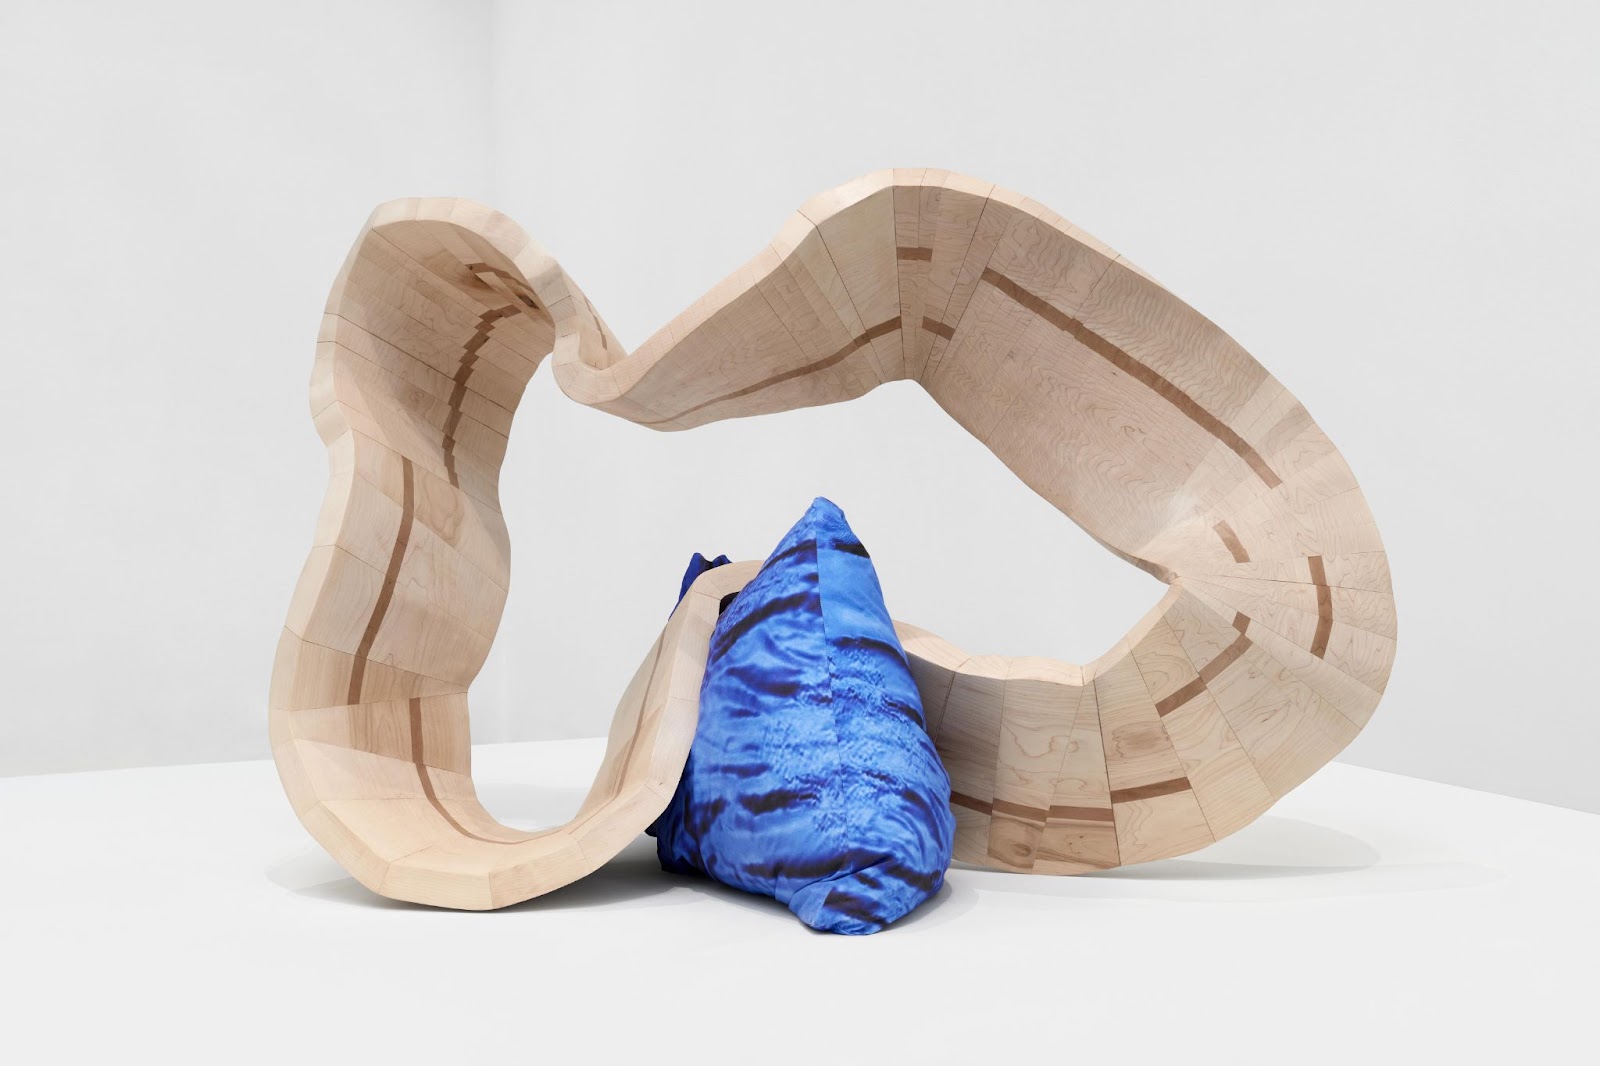 Wooden, irregularly shaped mobius strips made out of small sectors of wood; the sculpture lies on top of a blue pillow.